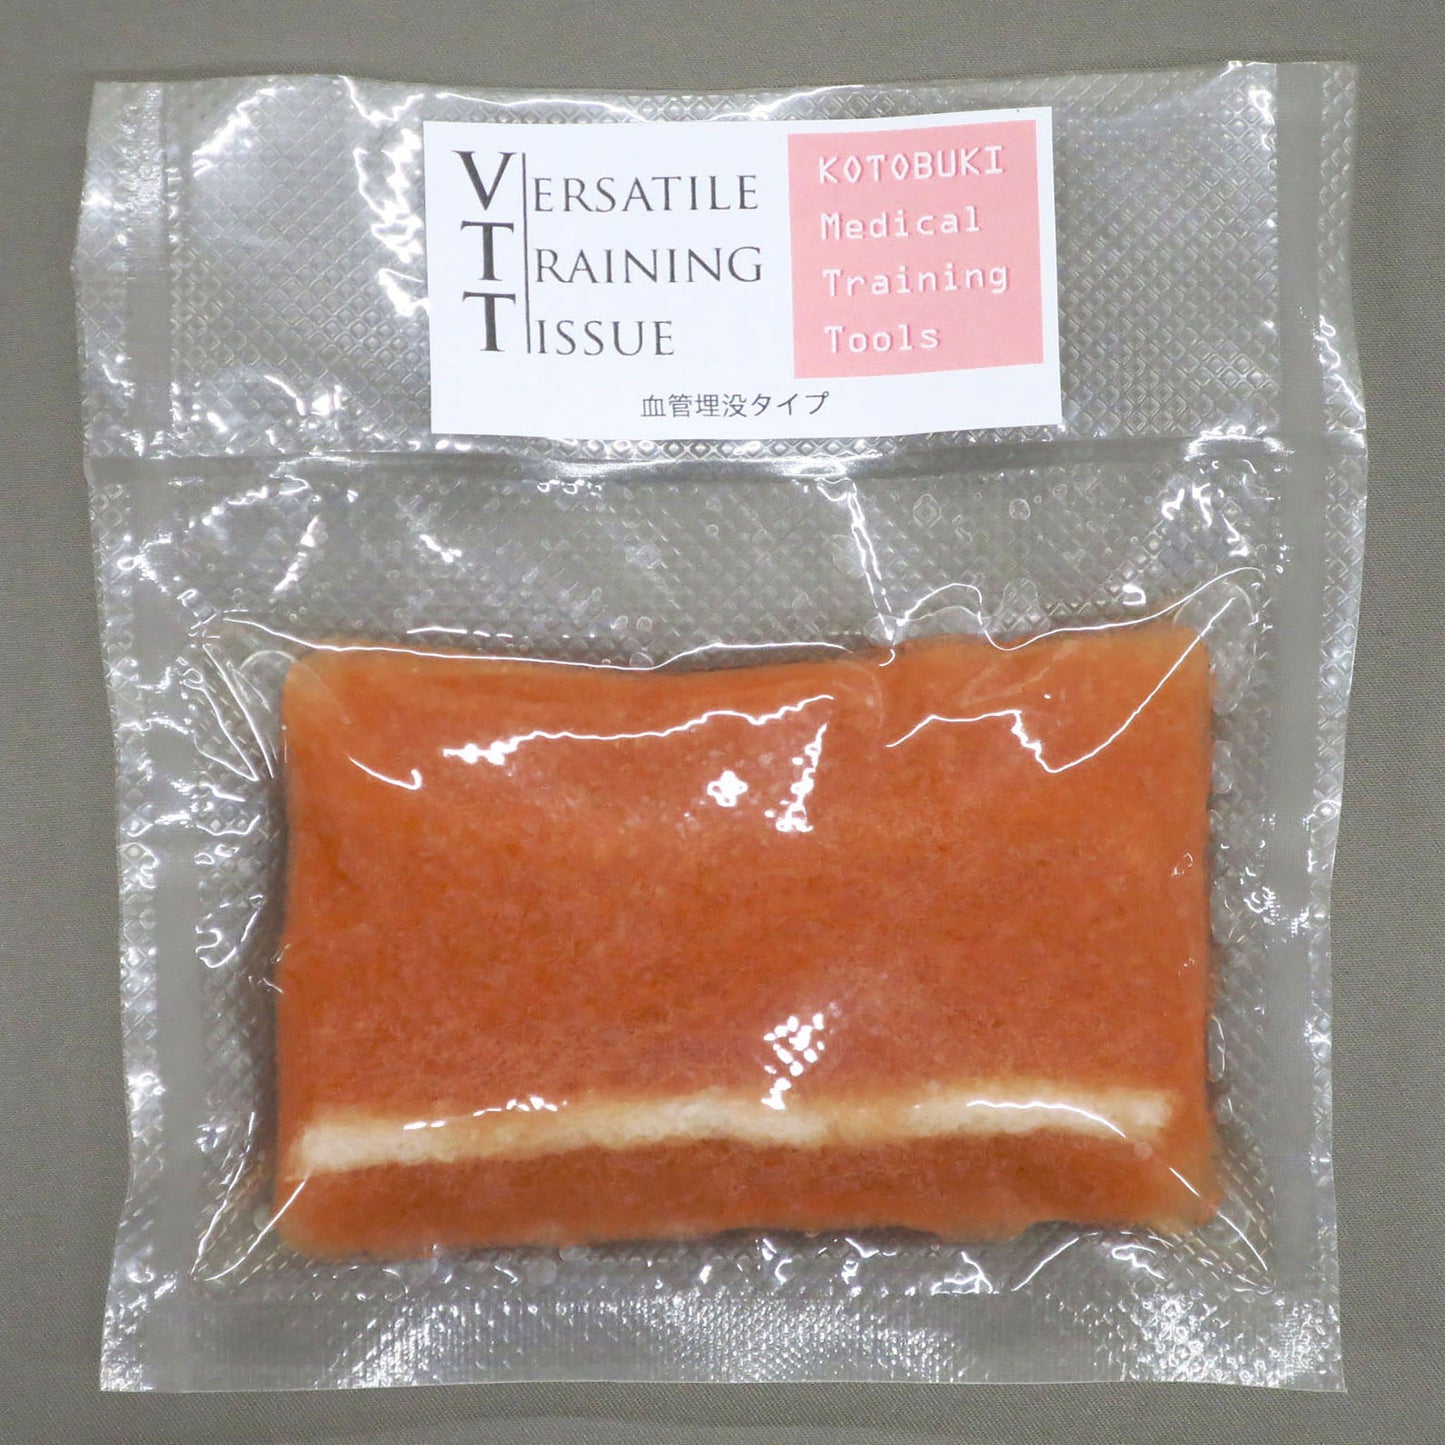 The VTT Vessel Dissection Model in its shrink-wrapped packaging against a gray background. 